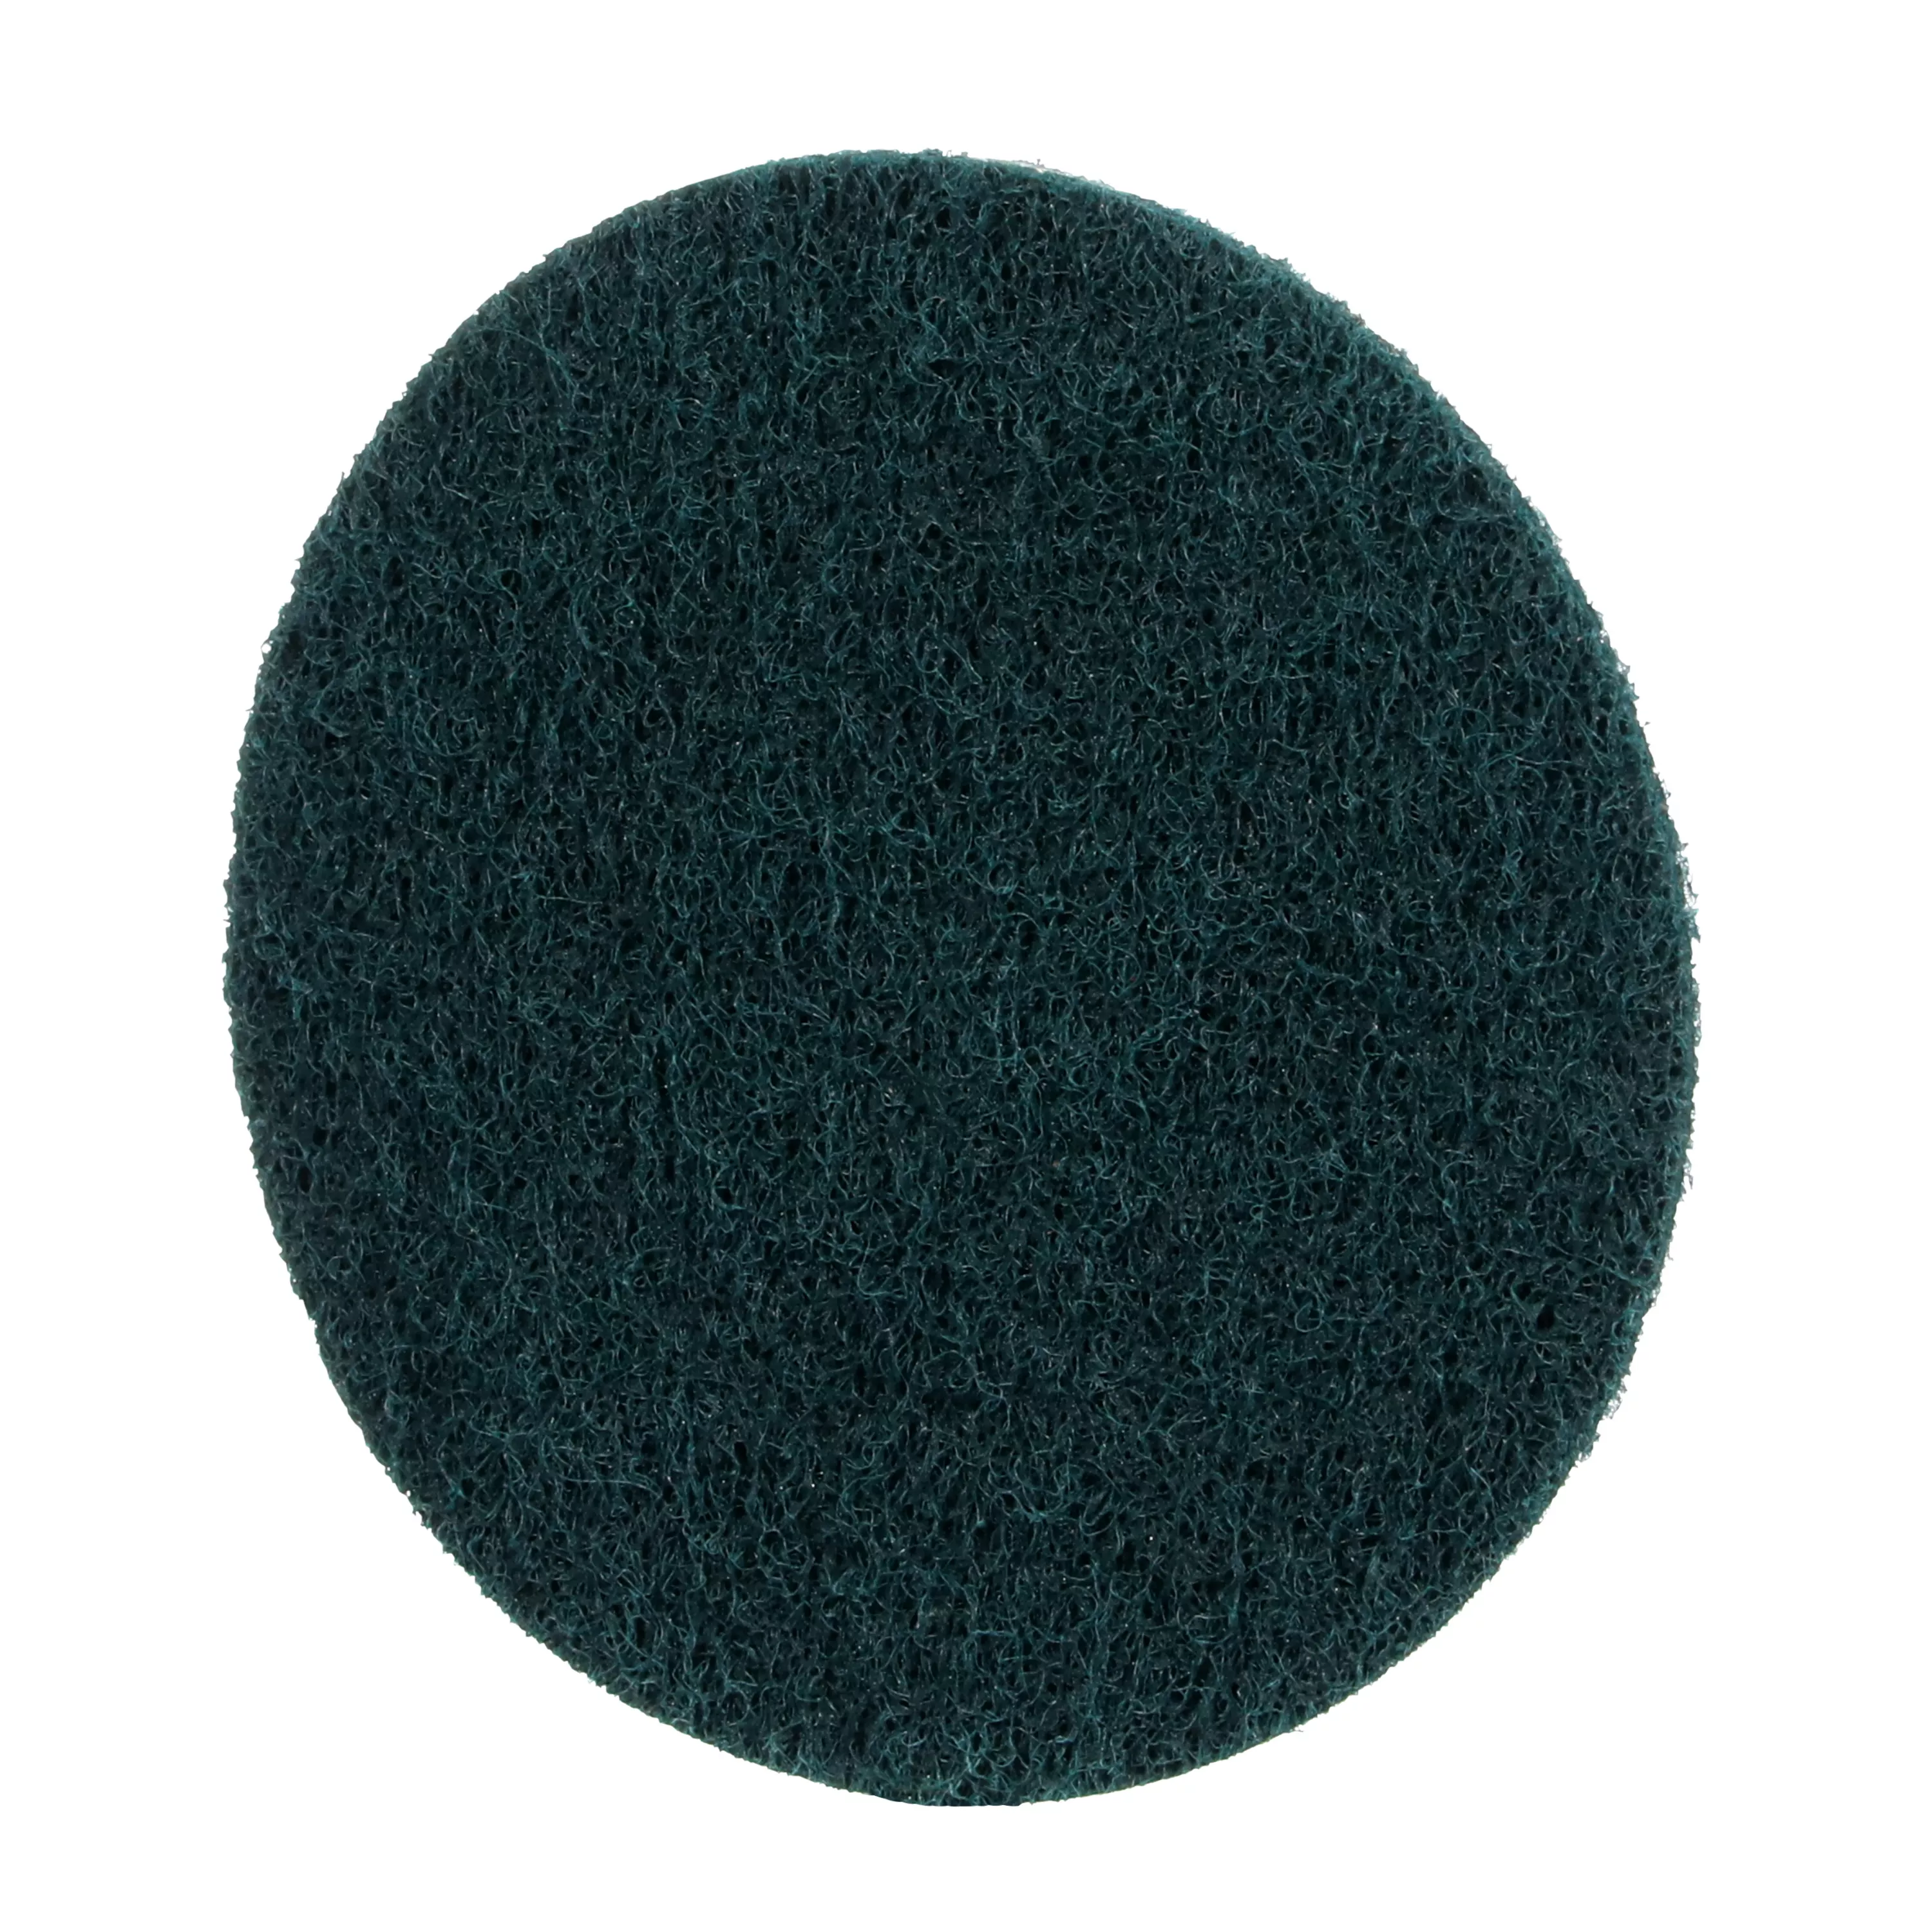 SKU 7100142217 | Standard Abrasives™ Quick Change Surface Conditioning RC Disc